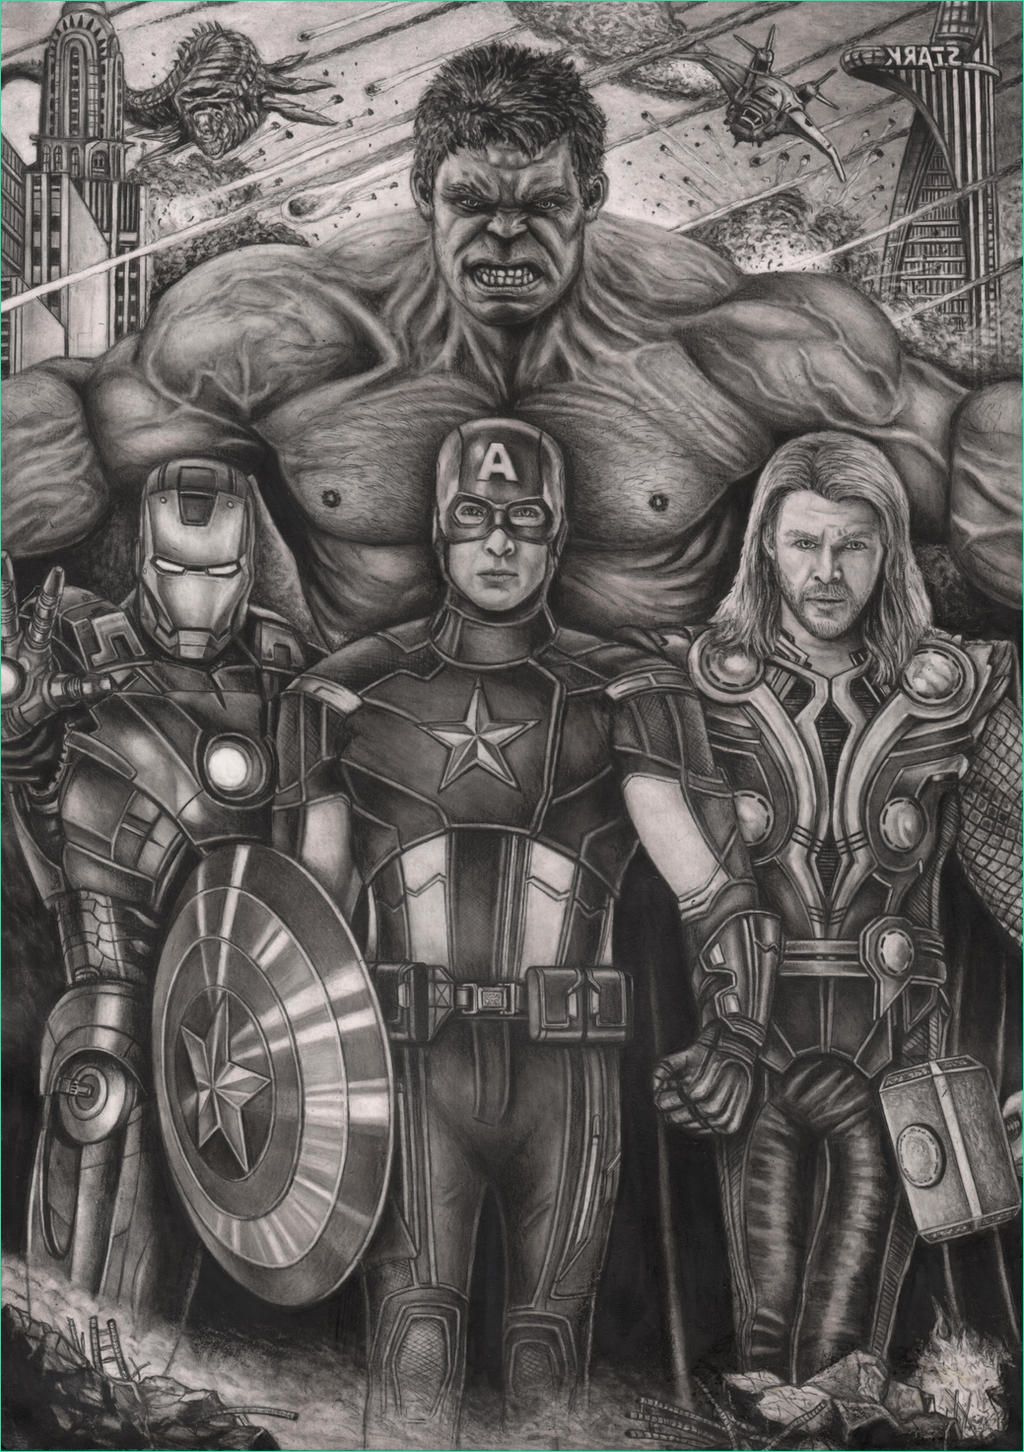 The Avengers graphite drawing